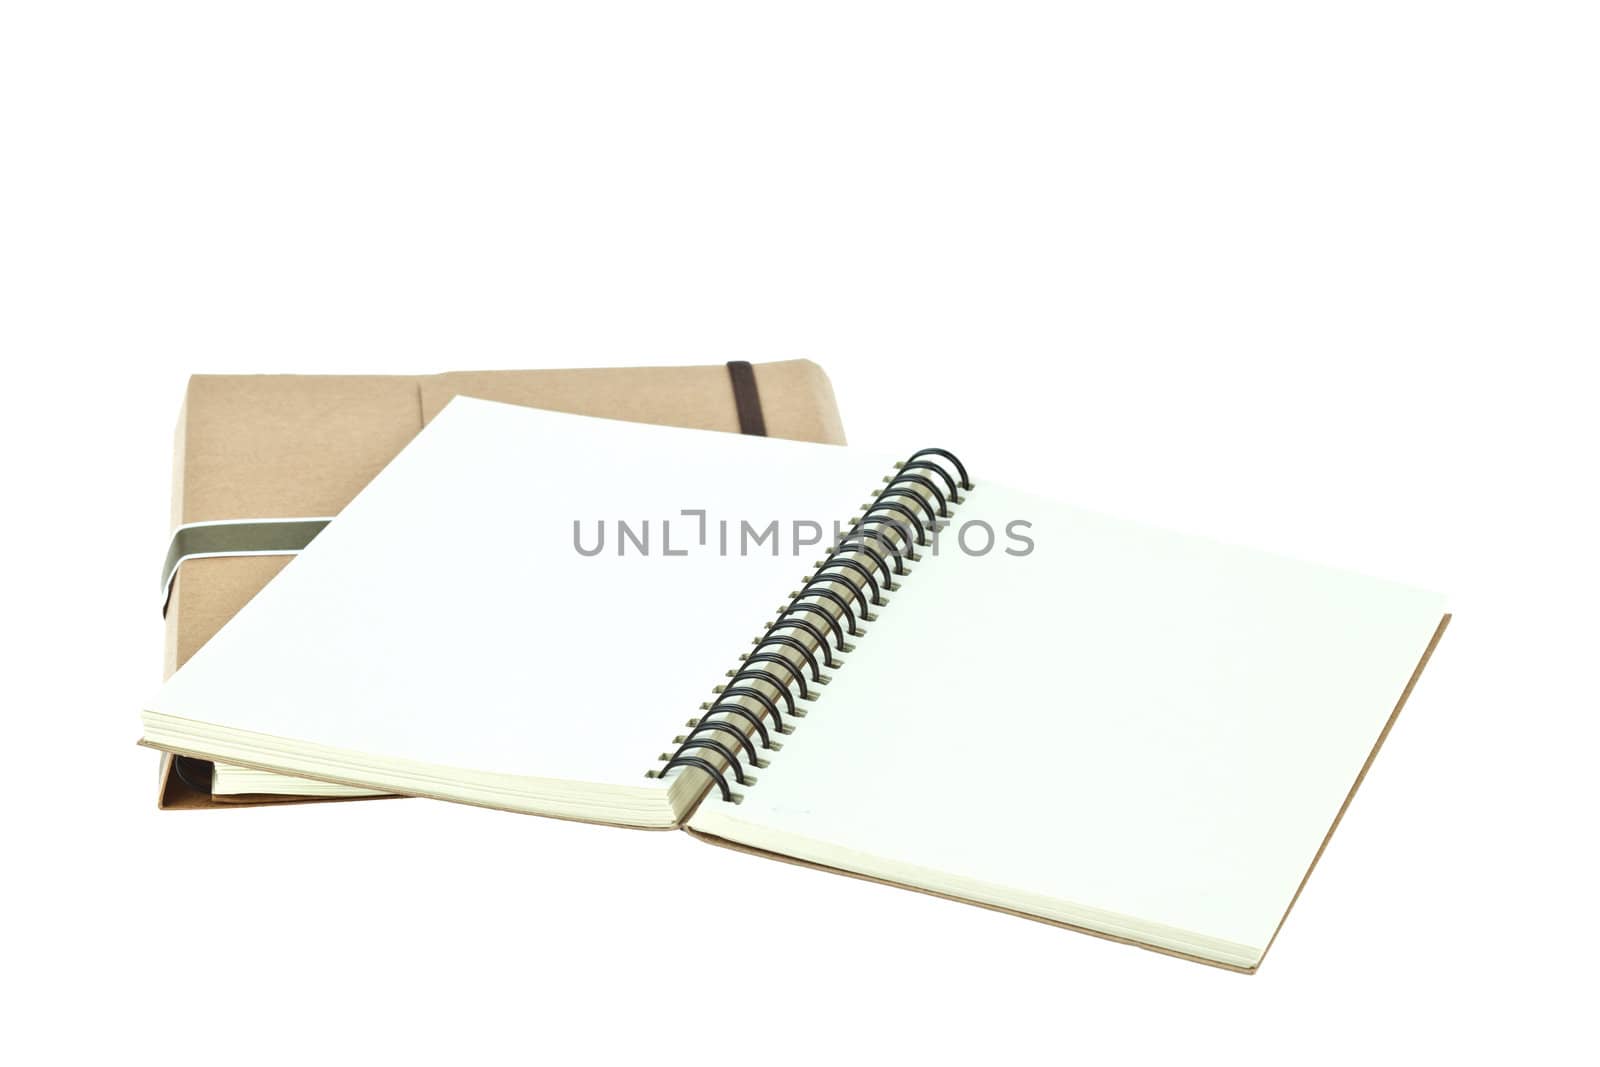 Isolated Light cream color paper note book on brown book